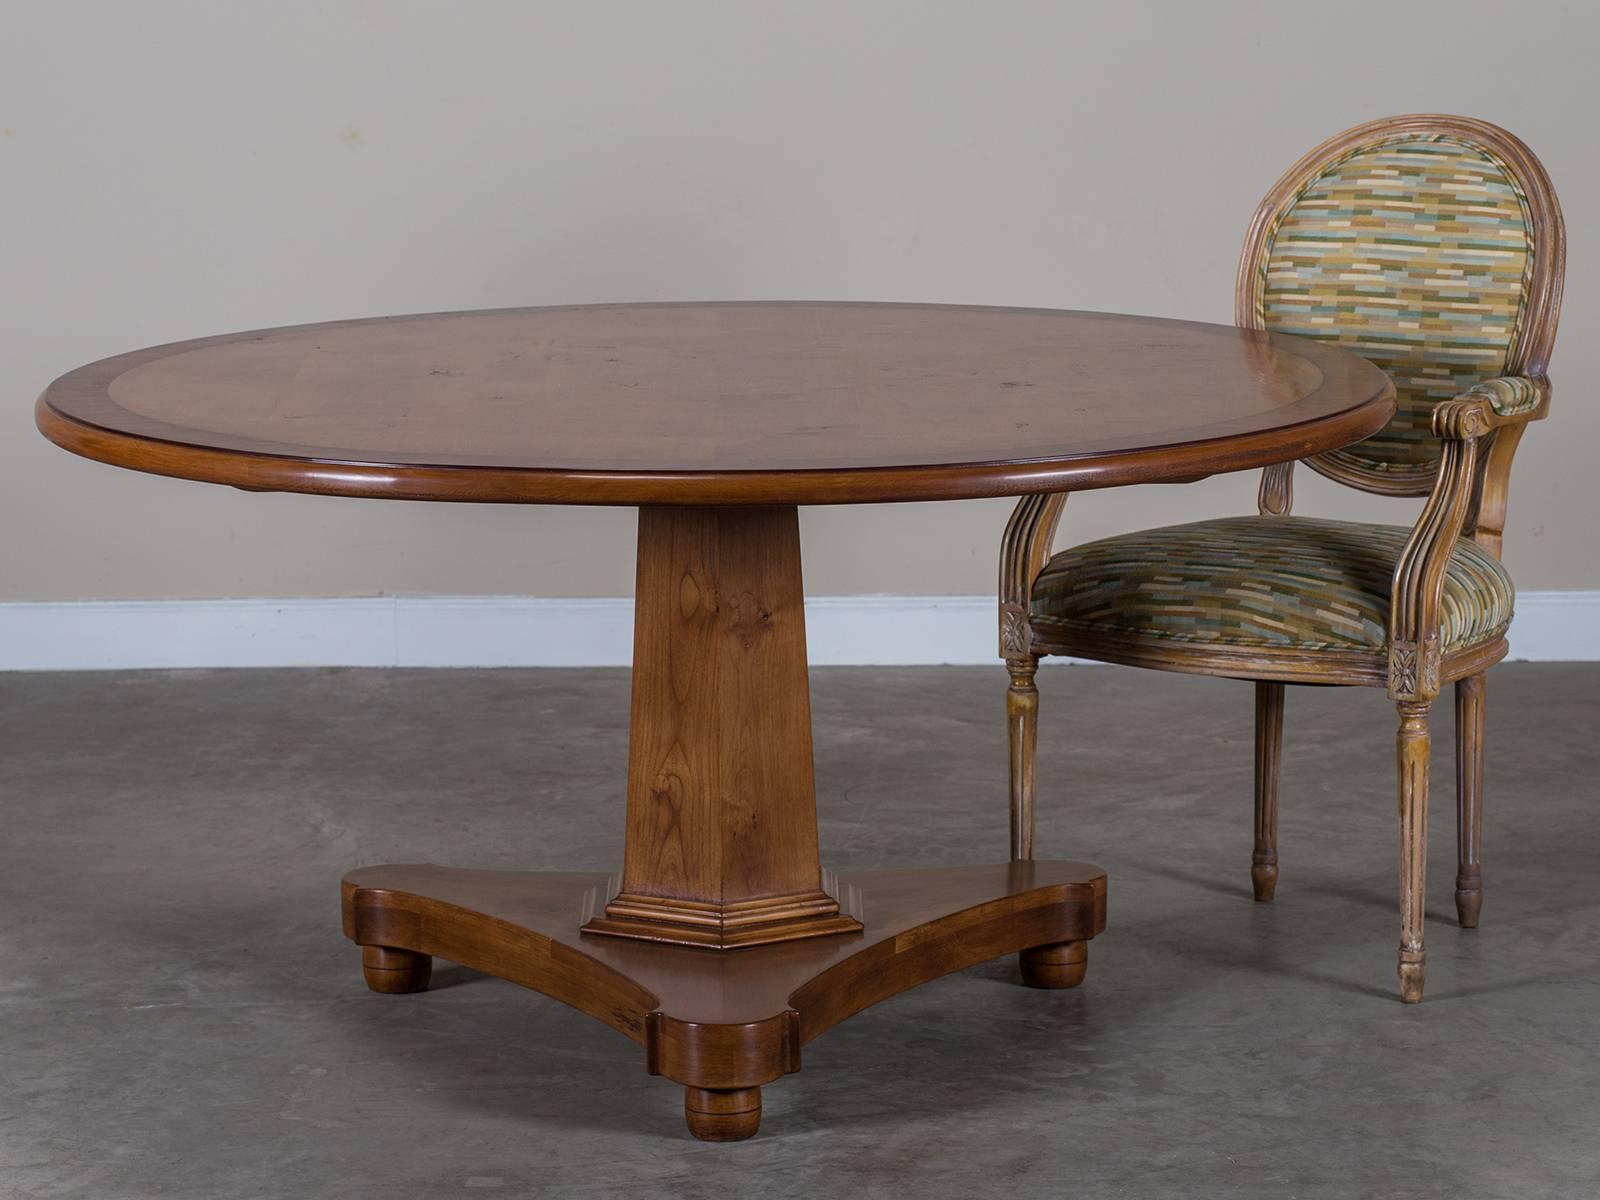 Receive our new selections direct from 1stdibs by email each week. Please click Follow Dealer below and see them first!

This handmade round dining table is inspired by the clean and simple lines used during the Regency period in England. The